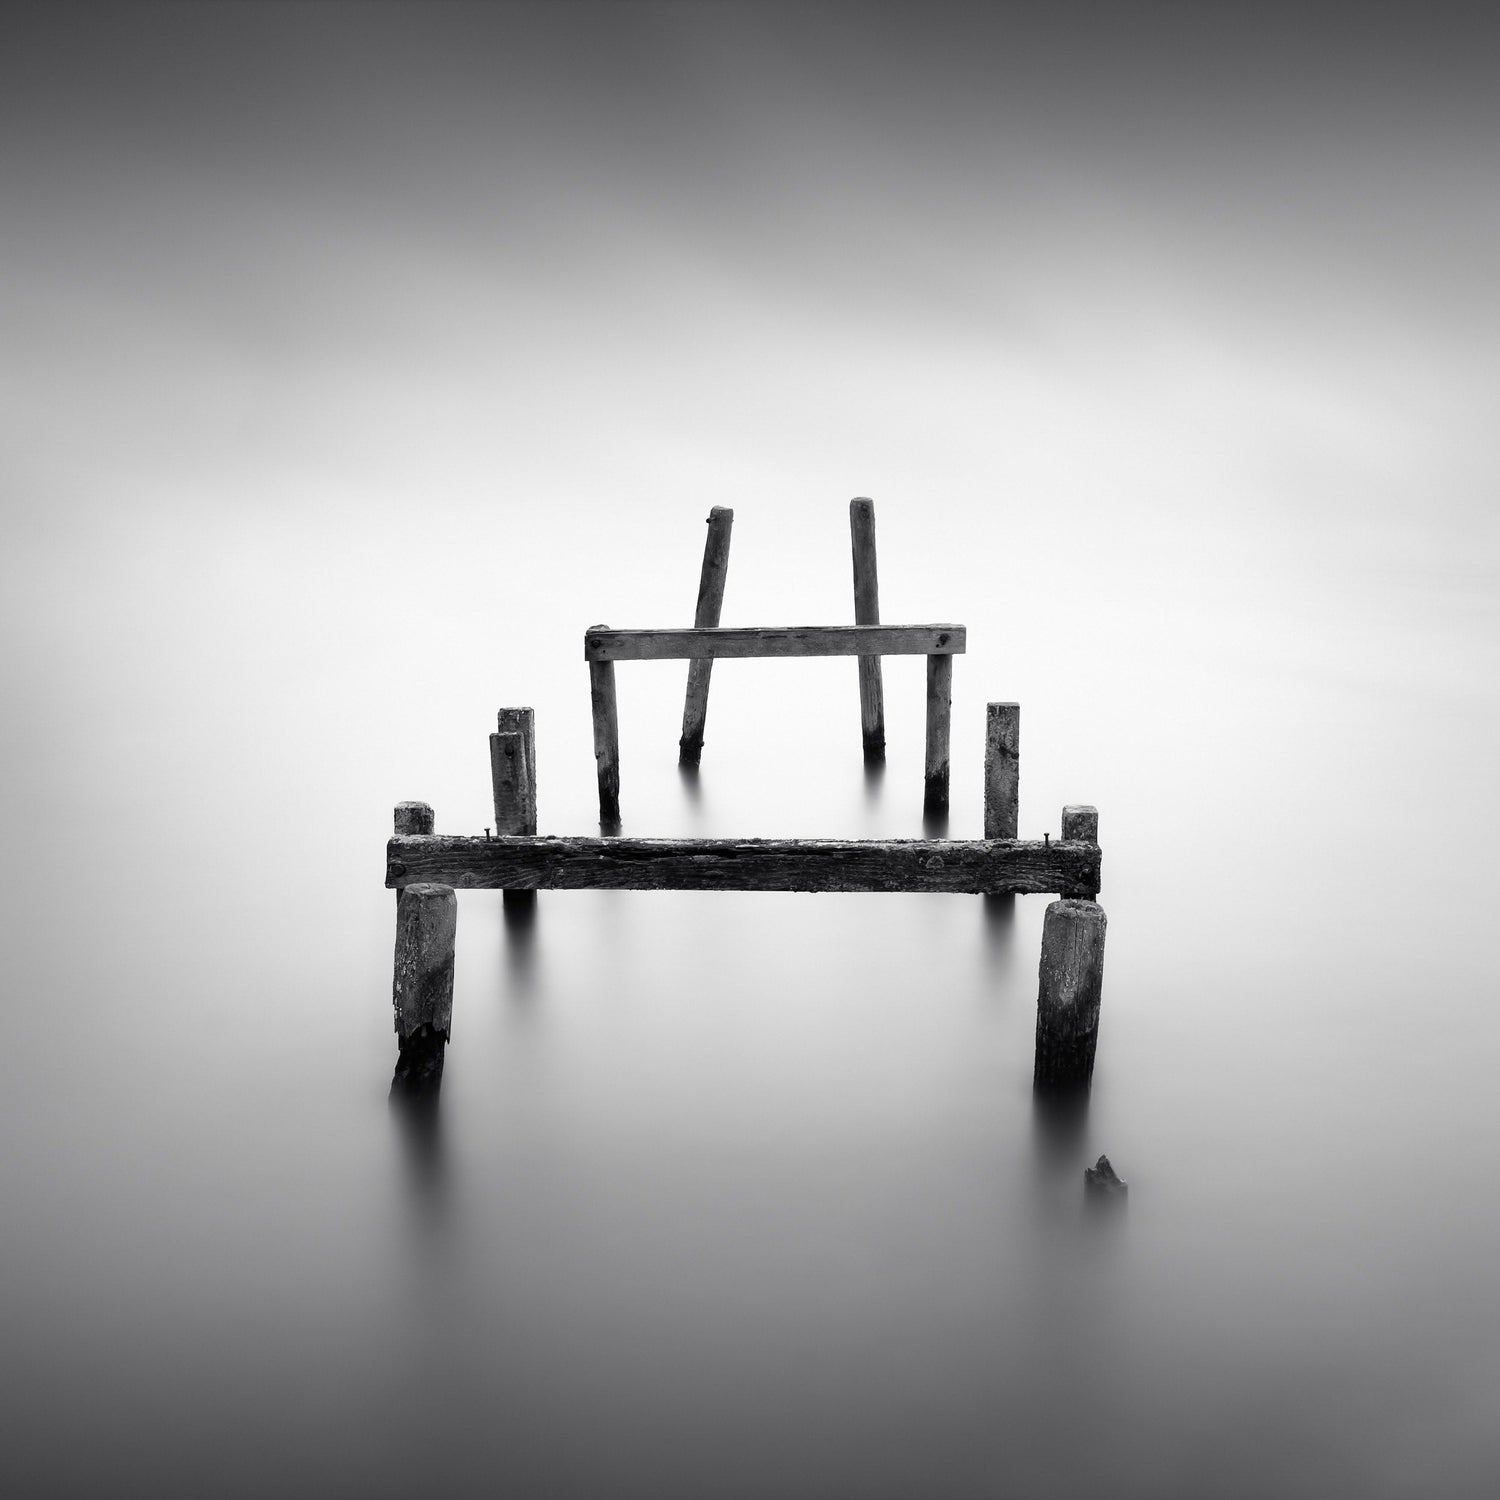 The artpiece 'Fallen Apart' by Marco Maljaars shows the remains of a pier sitting lonely on a silent lake. Shot in black and white.